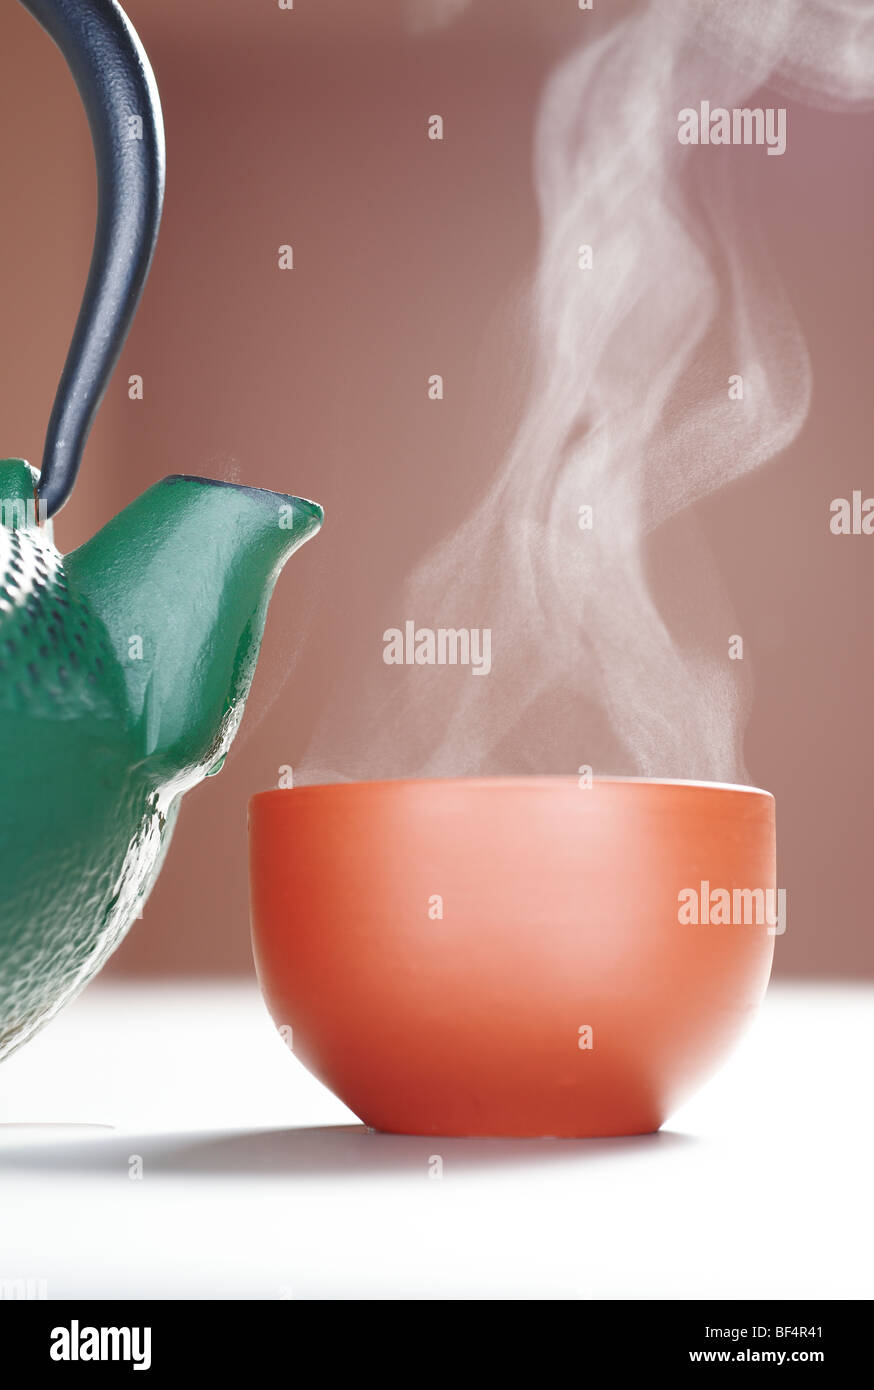 Cast iron teapot with a steaming cup of tea Stock Photo